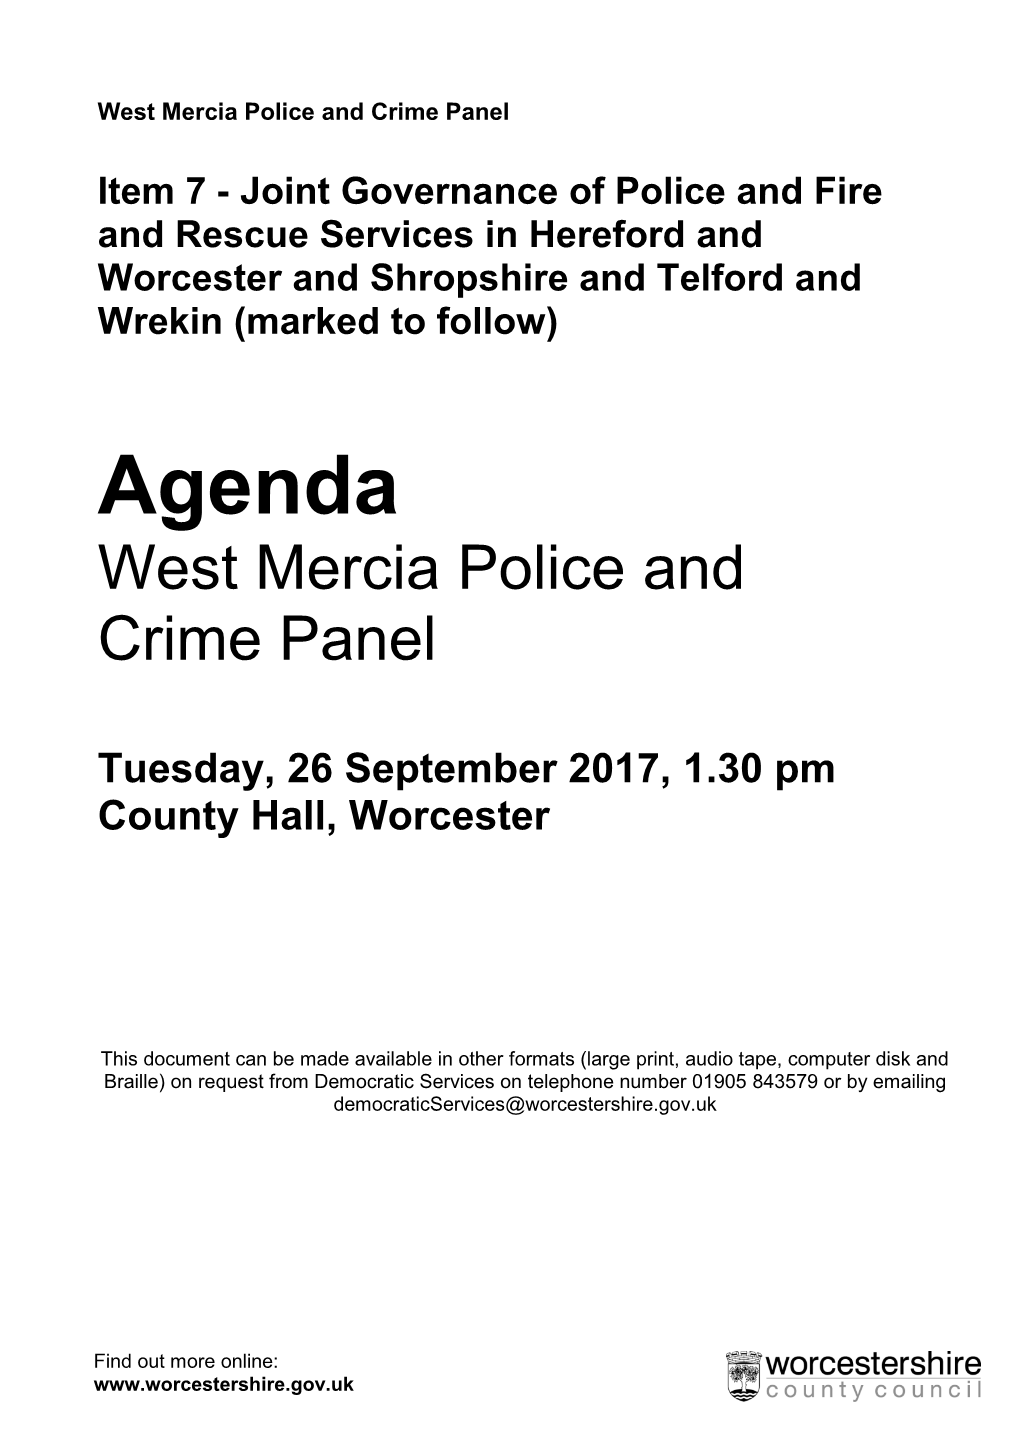 Joint Governance of Police and Fire and Rescue Services in Hereford and Worcester and Shropshire and Telford and Wrekin (Marked to Follow)